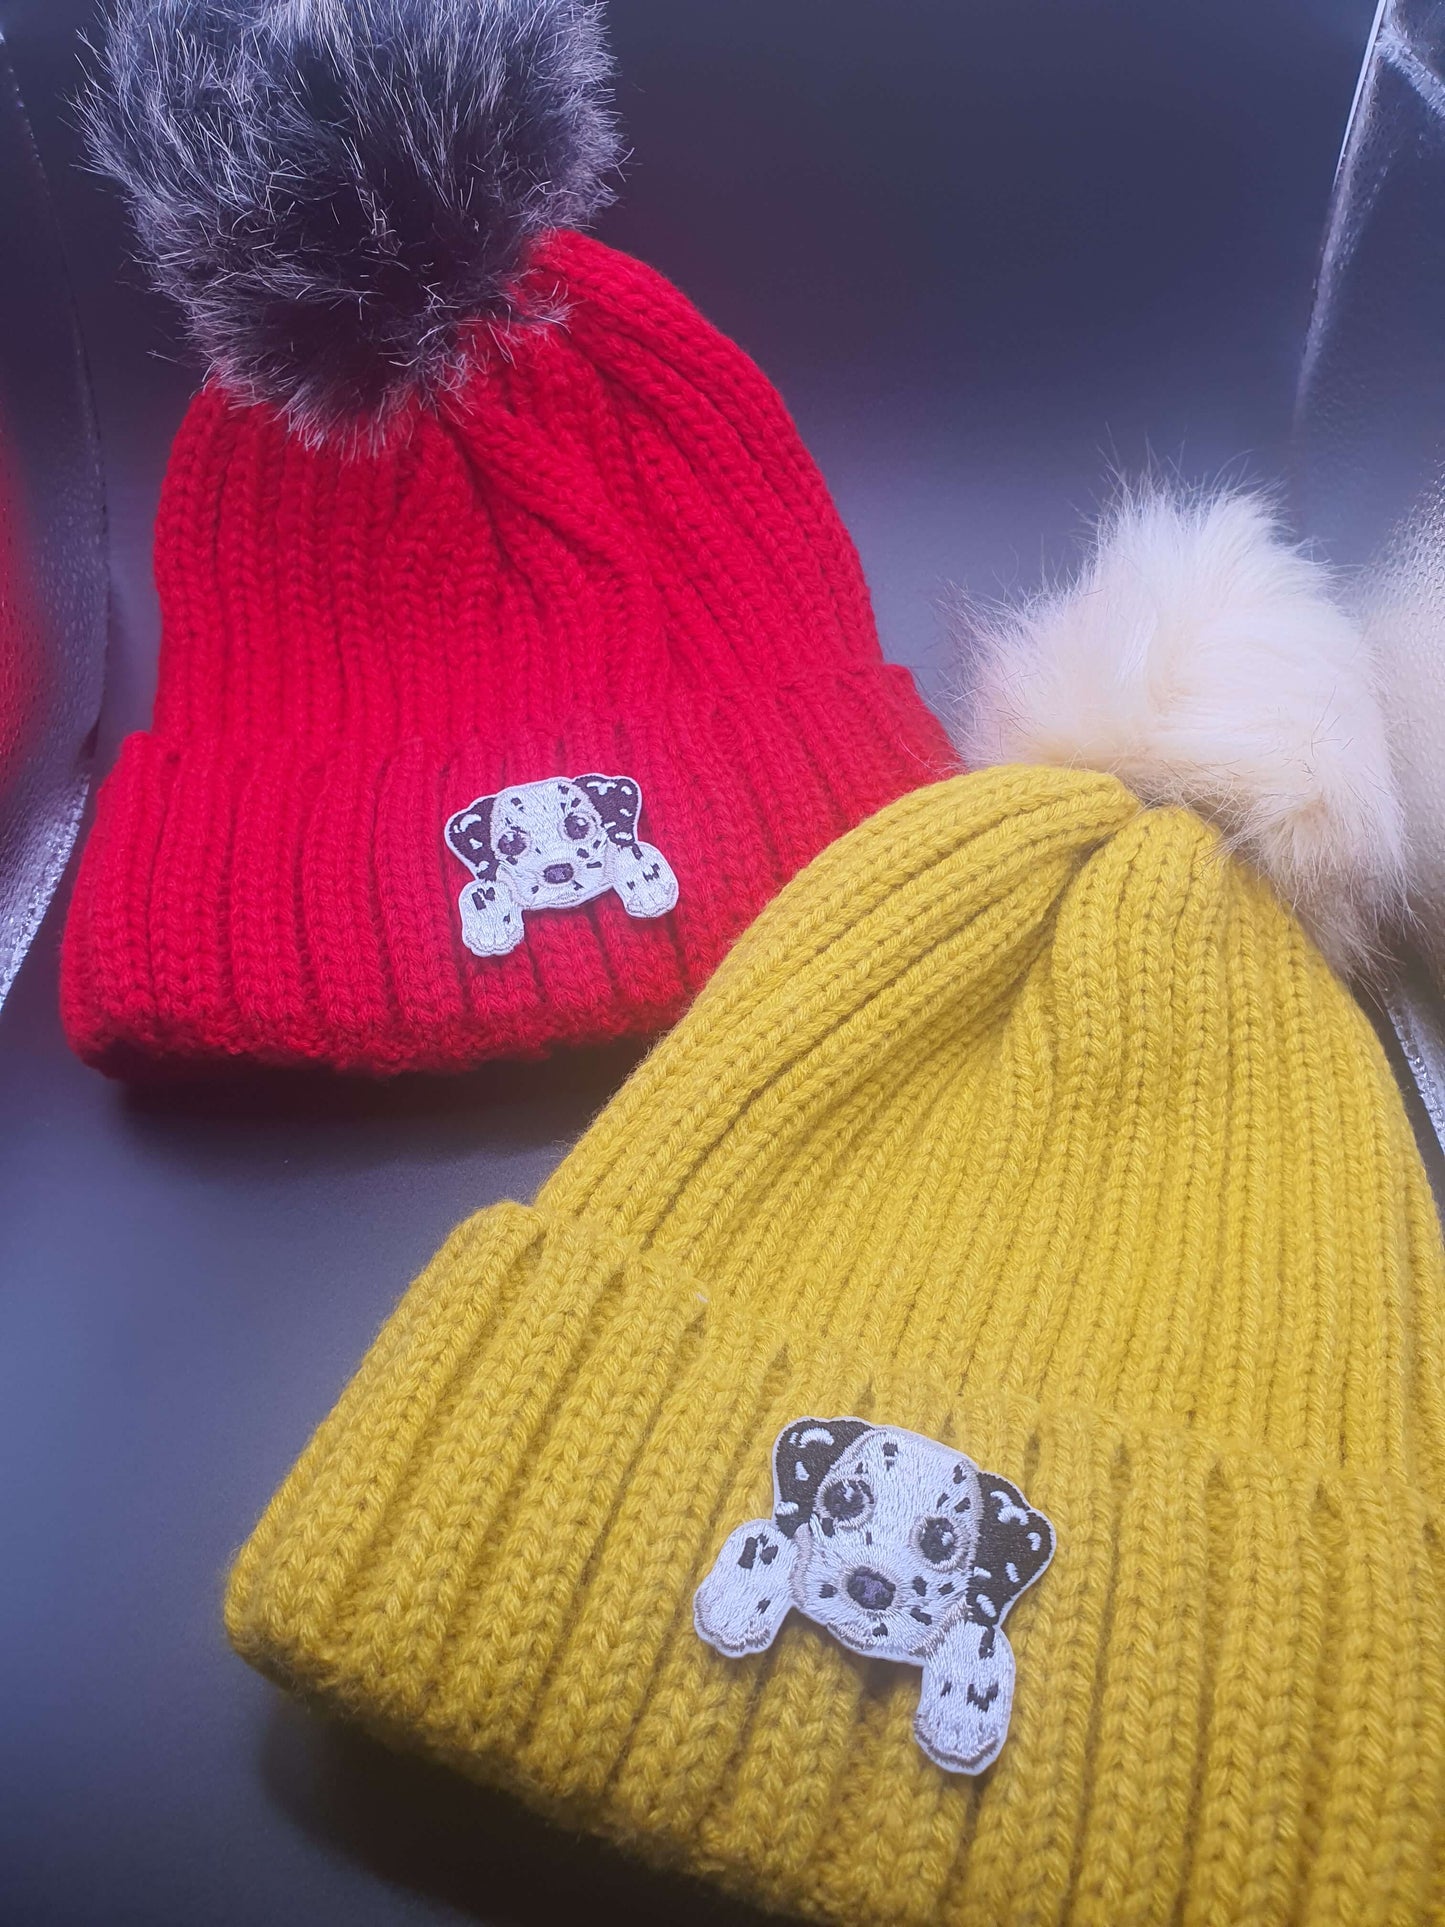 Dog Themed Knitted Beanies - Style's Bug Dalmatian / Both (25% OFF)